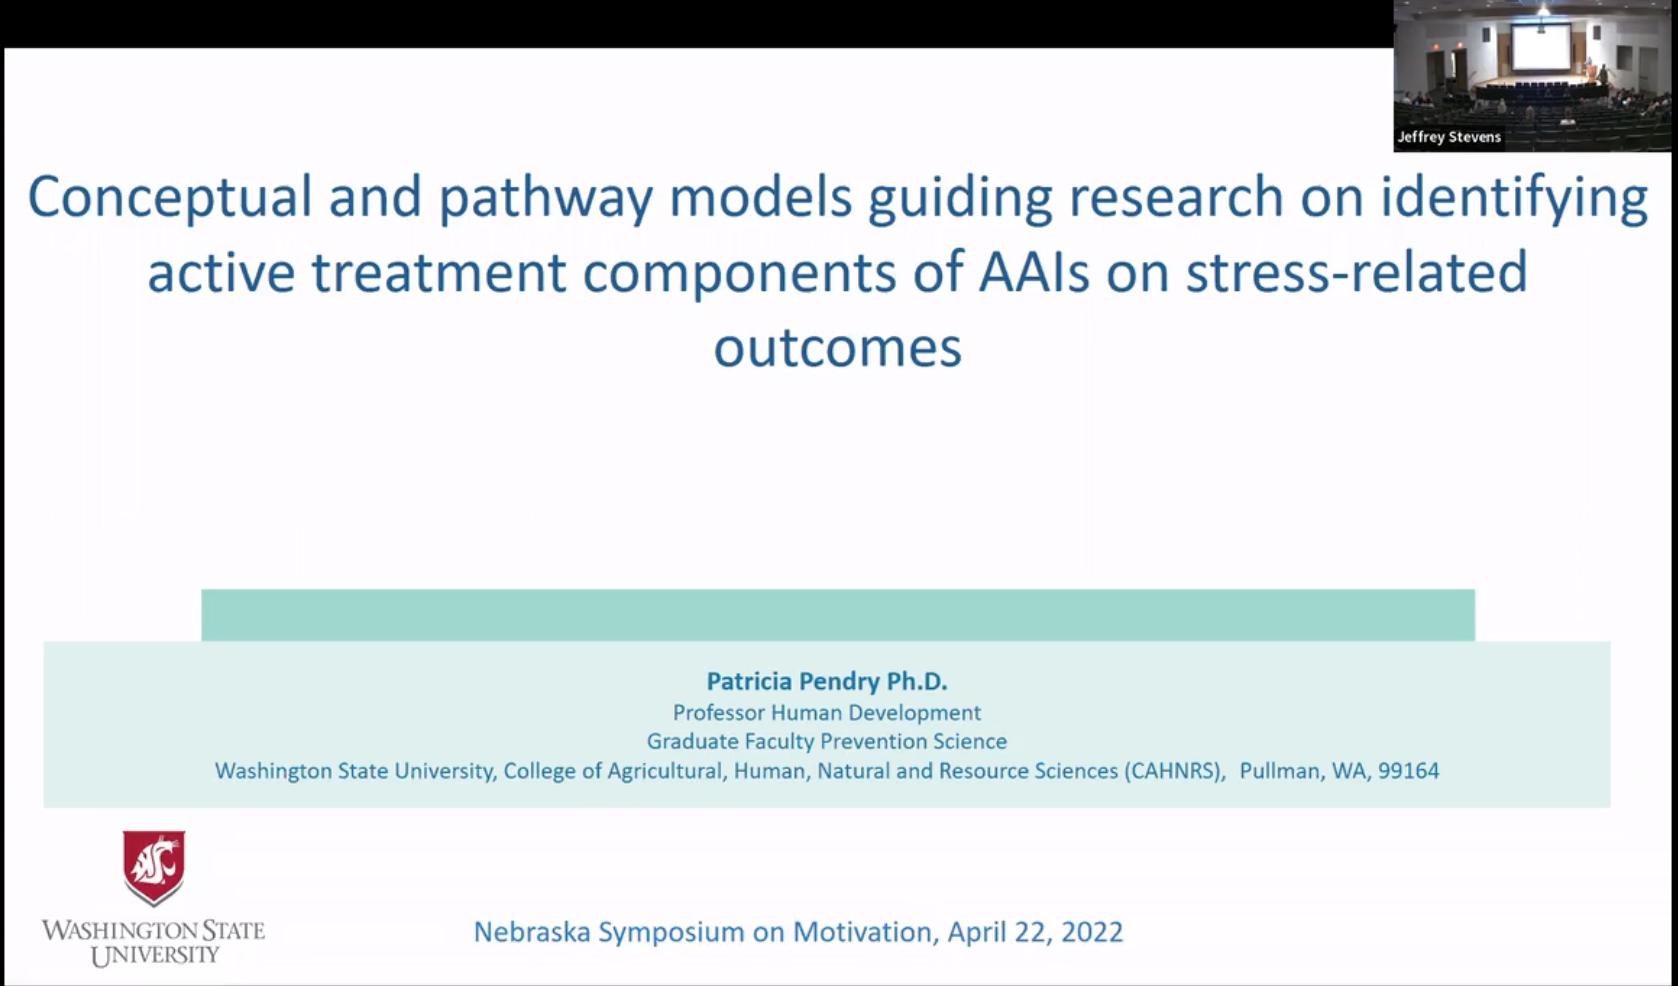 Conceptual and pathway models guiding research on identifying active treatment components of AAIs on stress-related outcomes